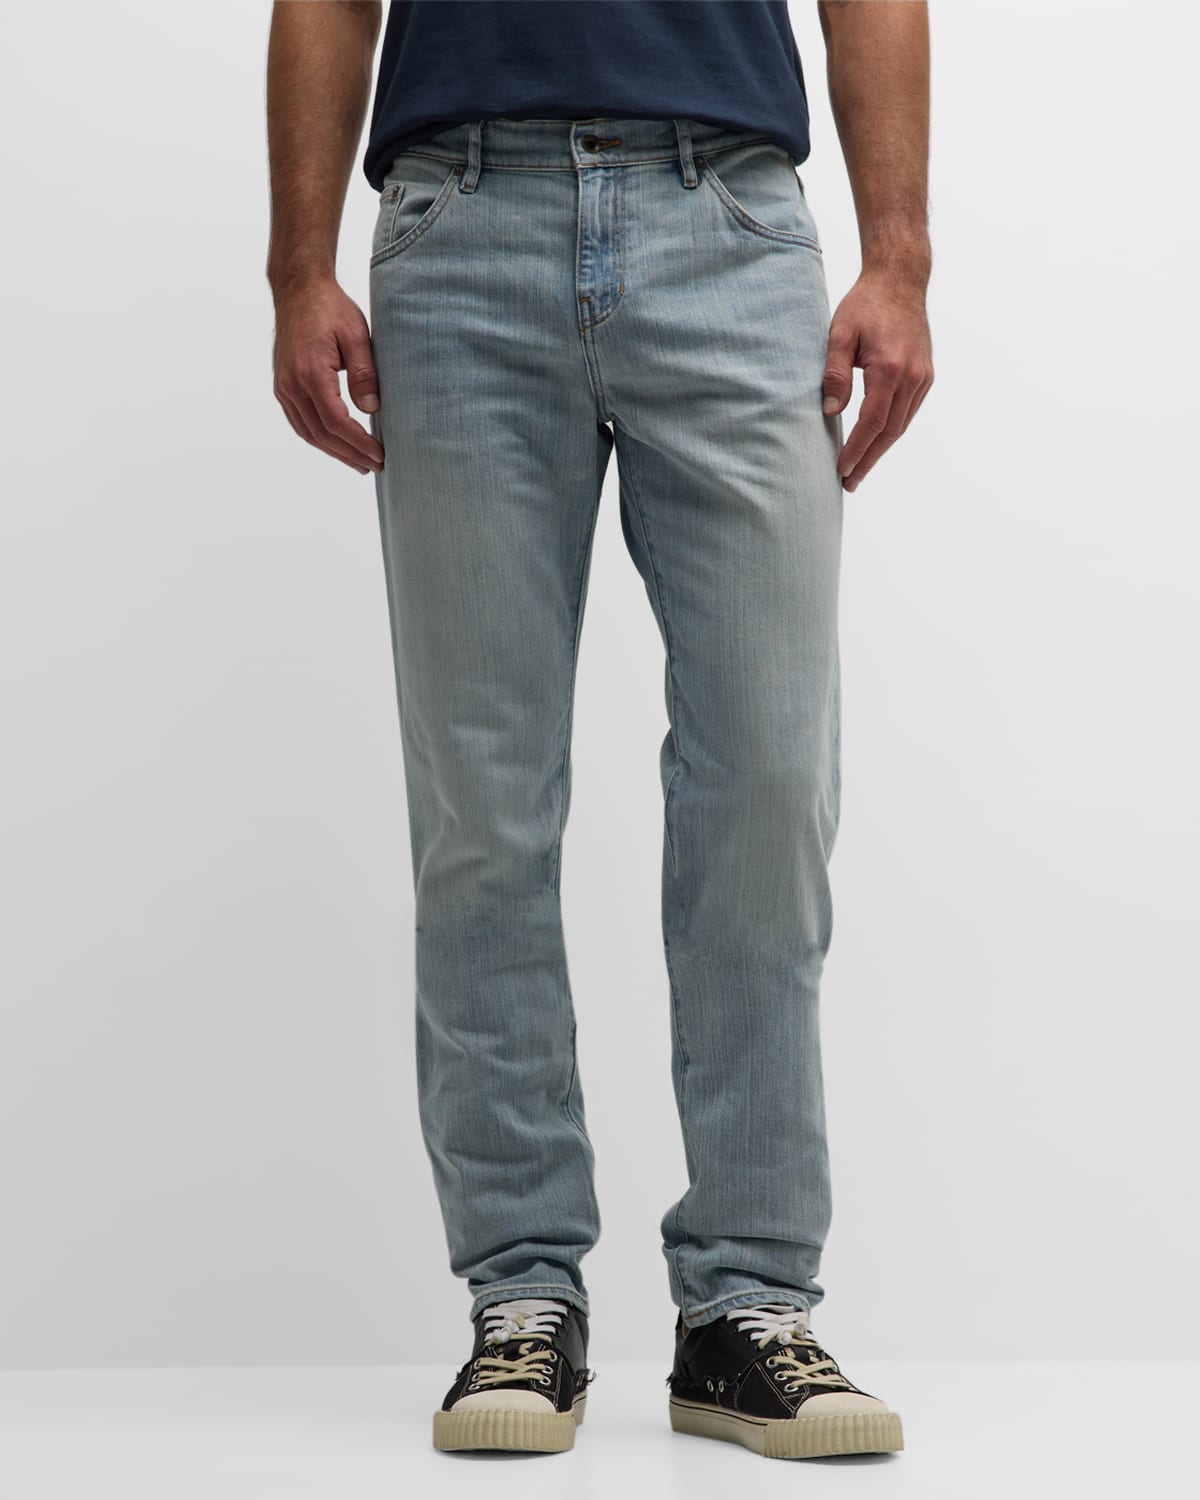 Raleigh Workshop Men's Martin Stretch Jeans In Lookout